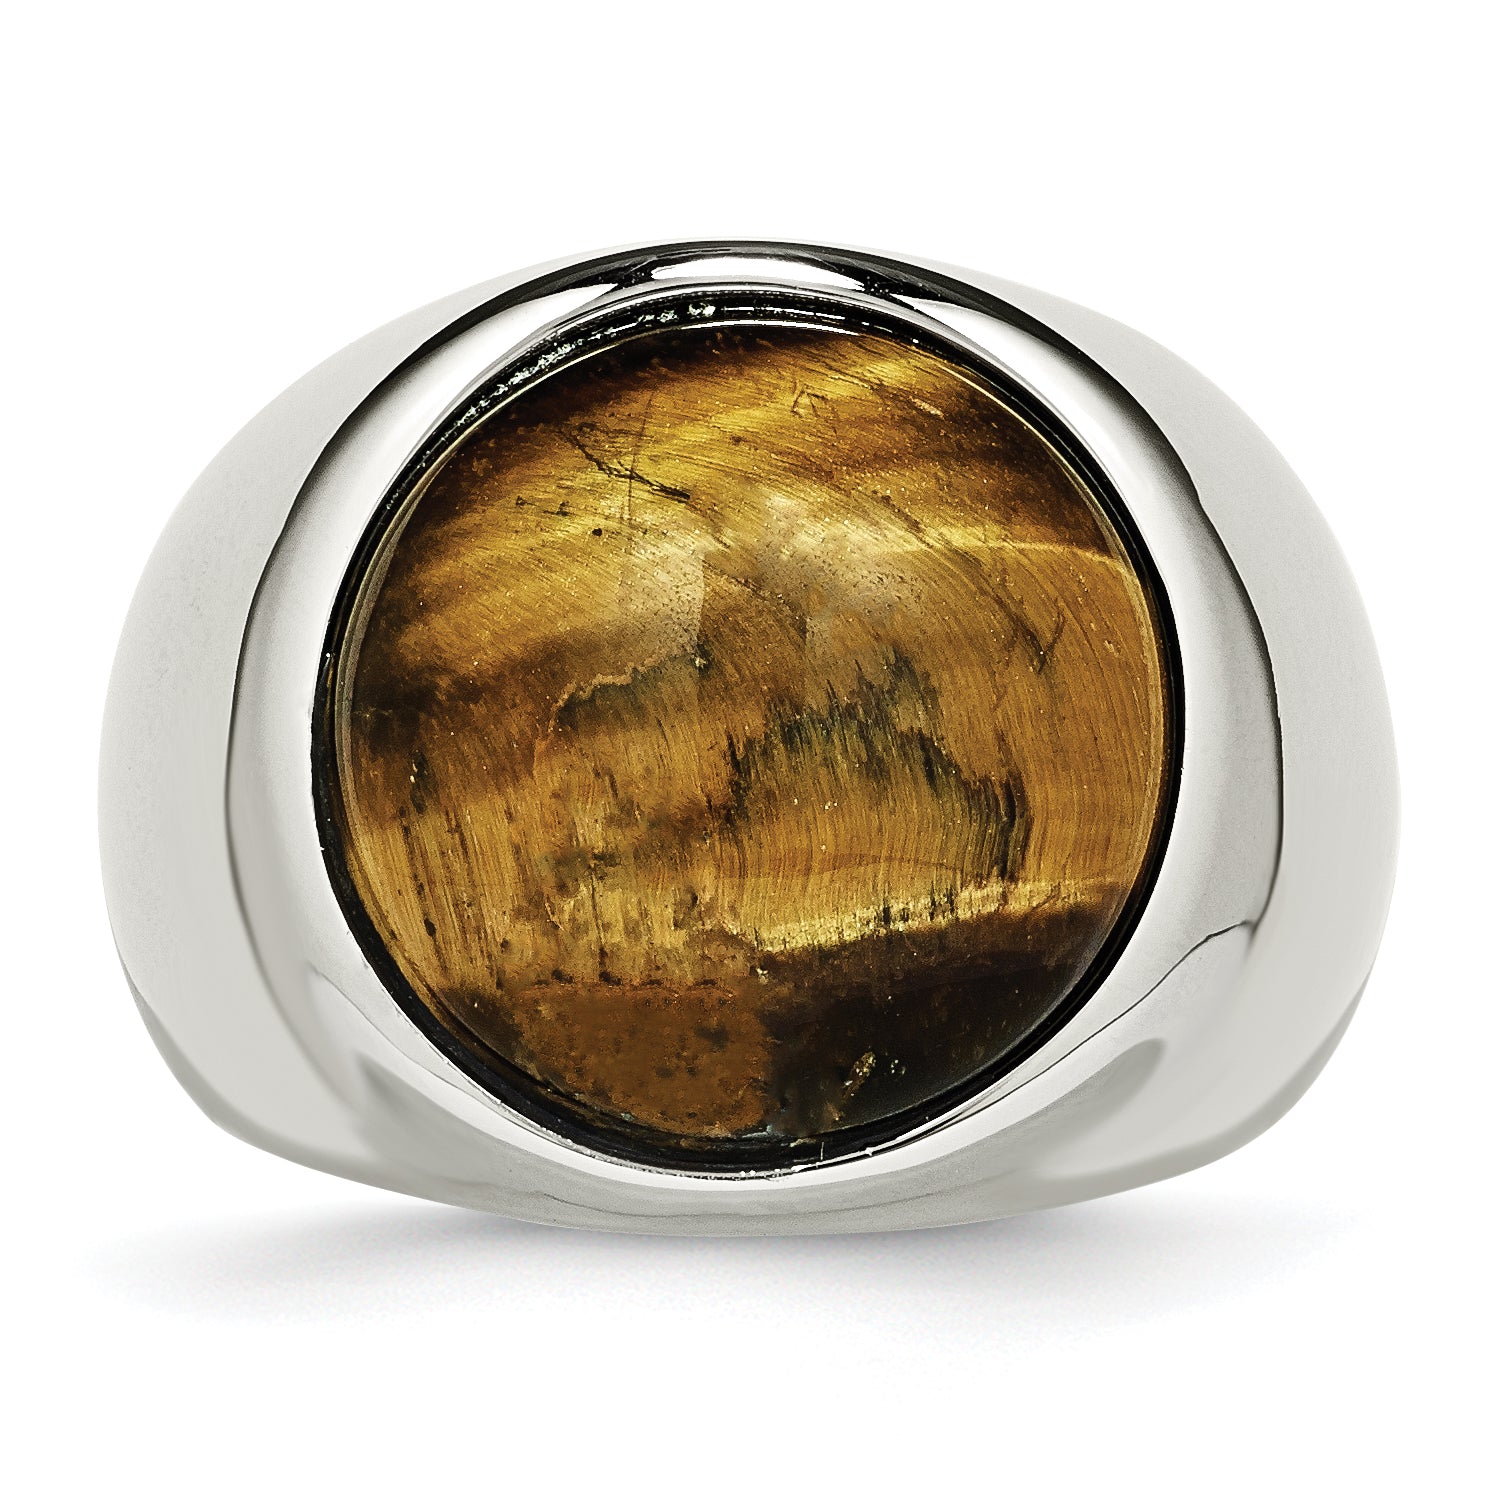 Stainless Steel Polished Tiger's Eye Ring